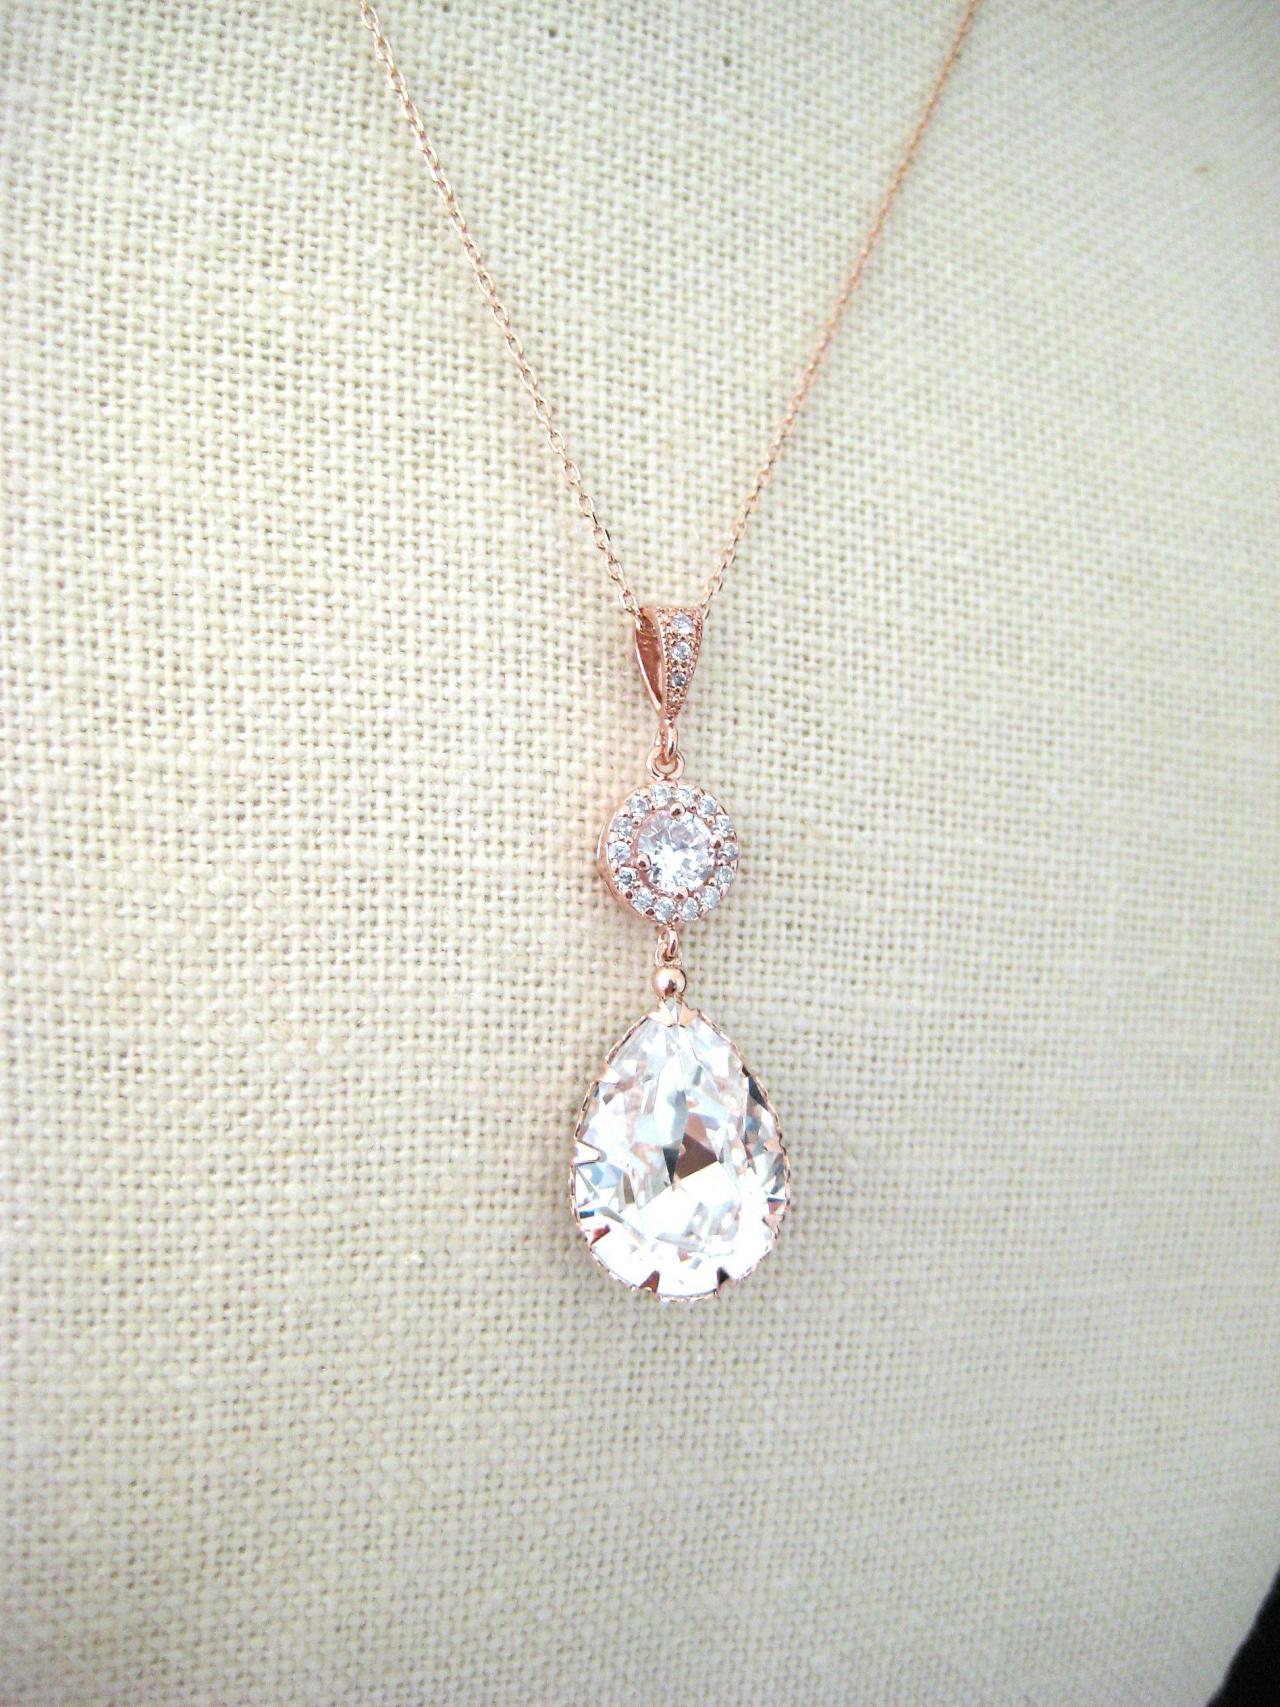 Rose Gold Bridal Crystal Necklace Swarovski Clear White Crystal Teardrop Necklace Wedding Jewelry Bridesmaid Gift Bridal Long Necklace(n142)